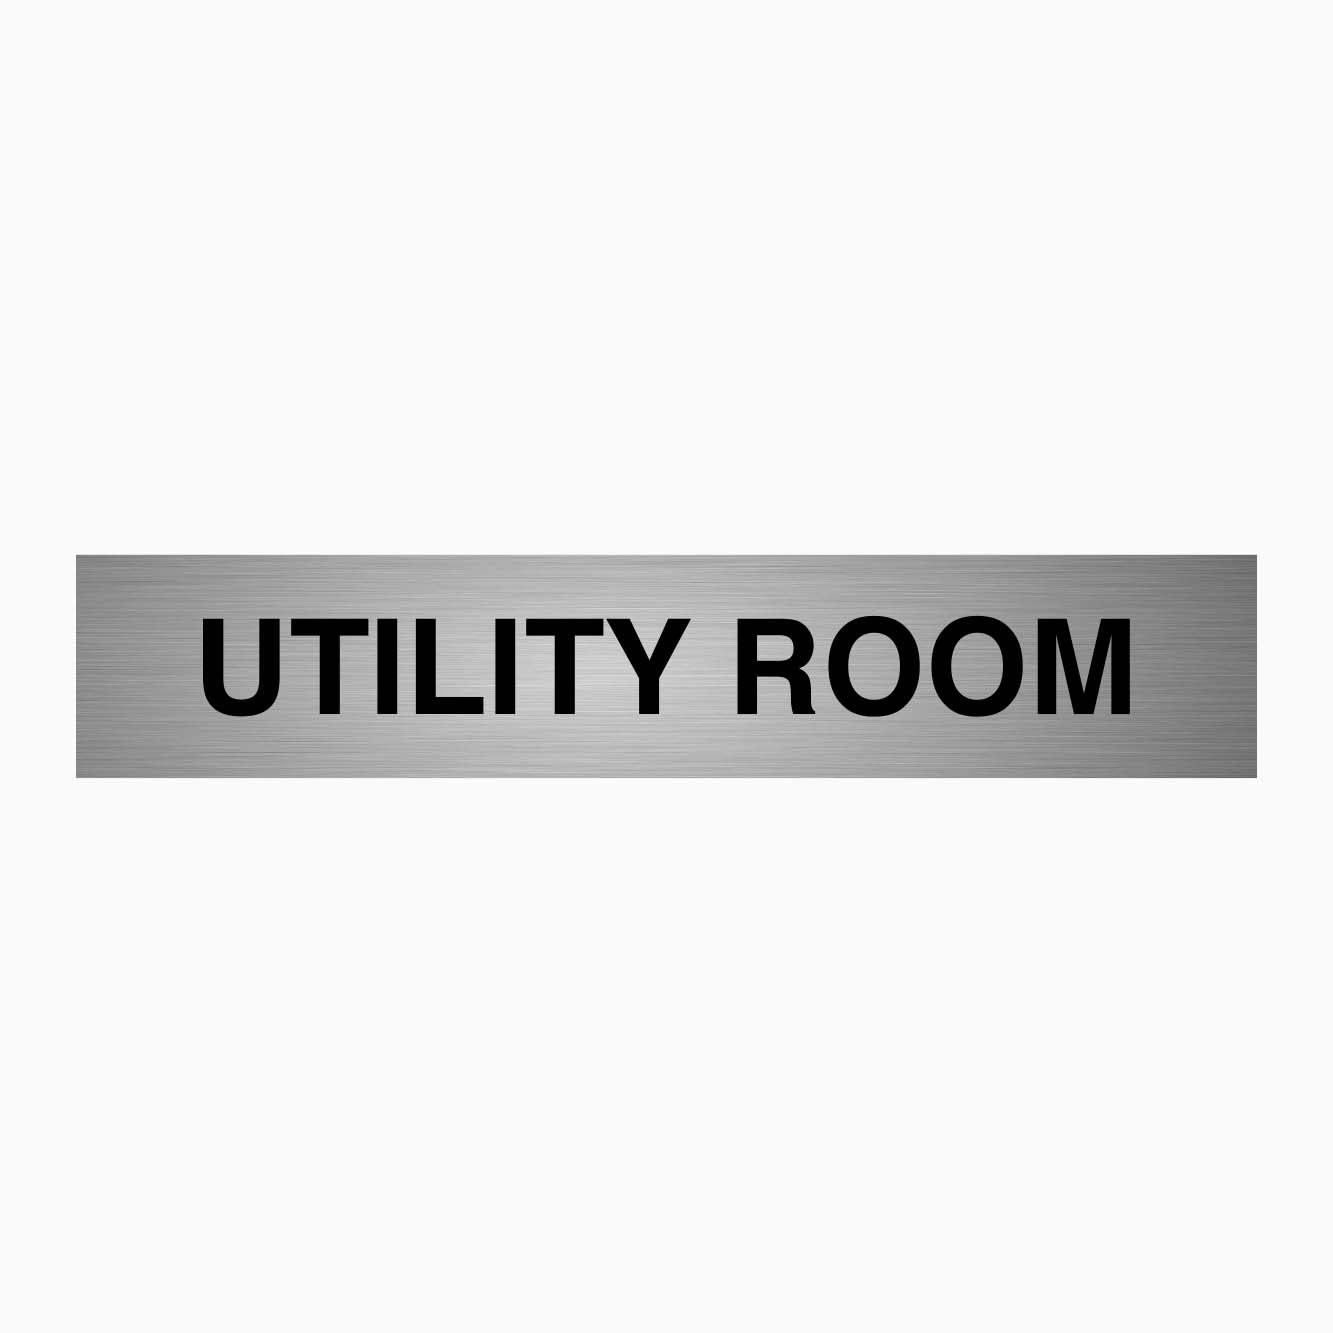 UTILITY ROOM SIGN - GET SIGNS